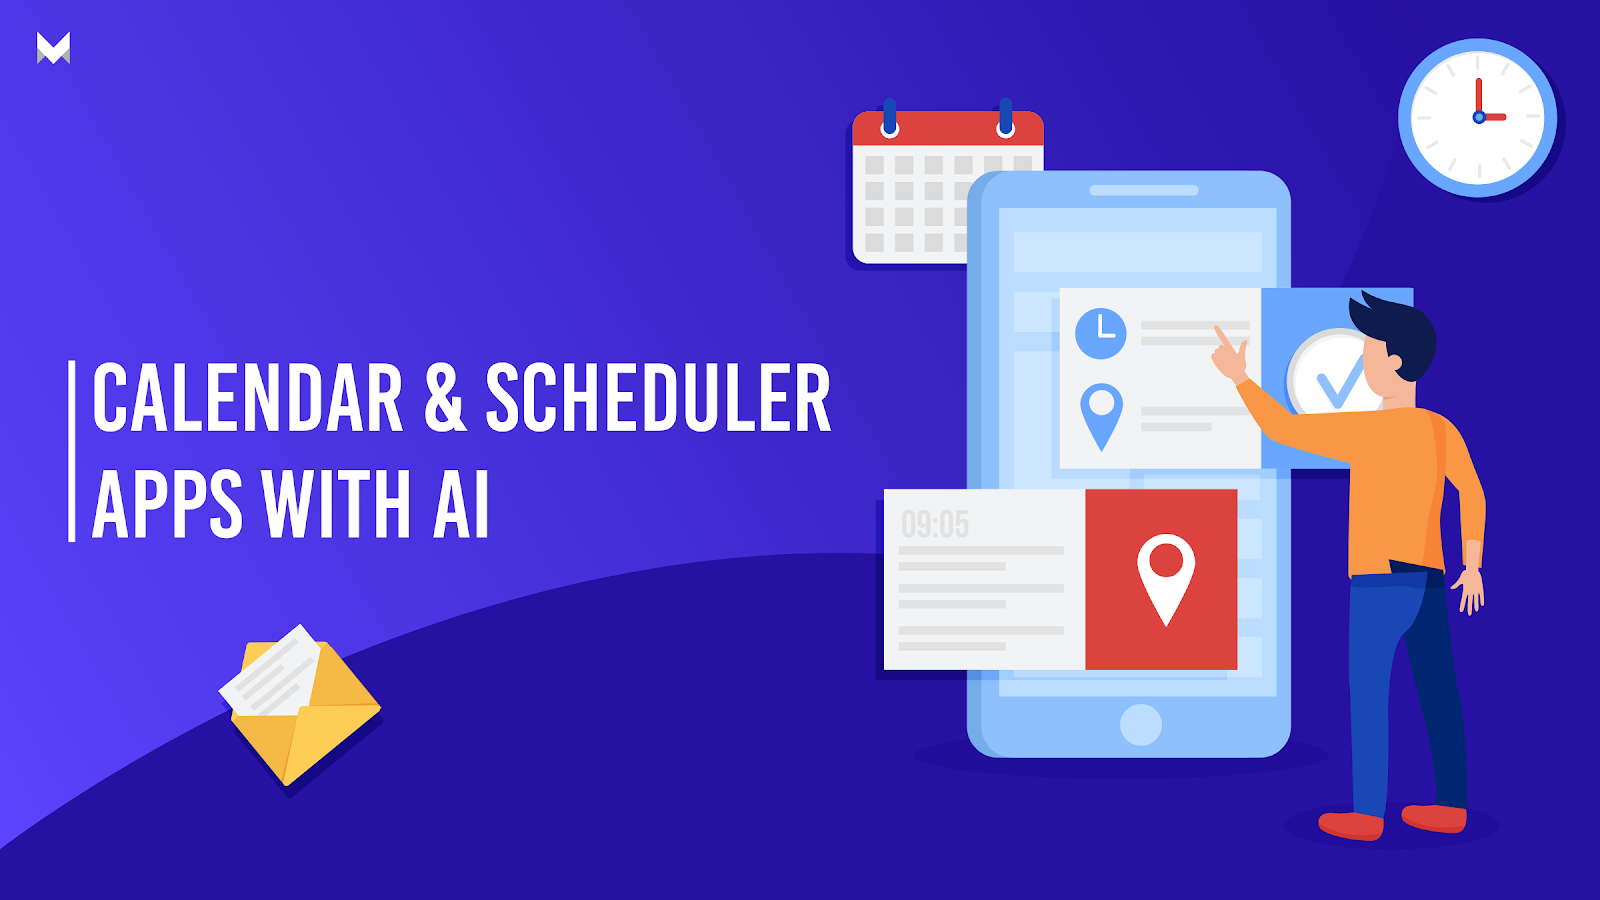 Calendar and Scheduler Apps with AI